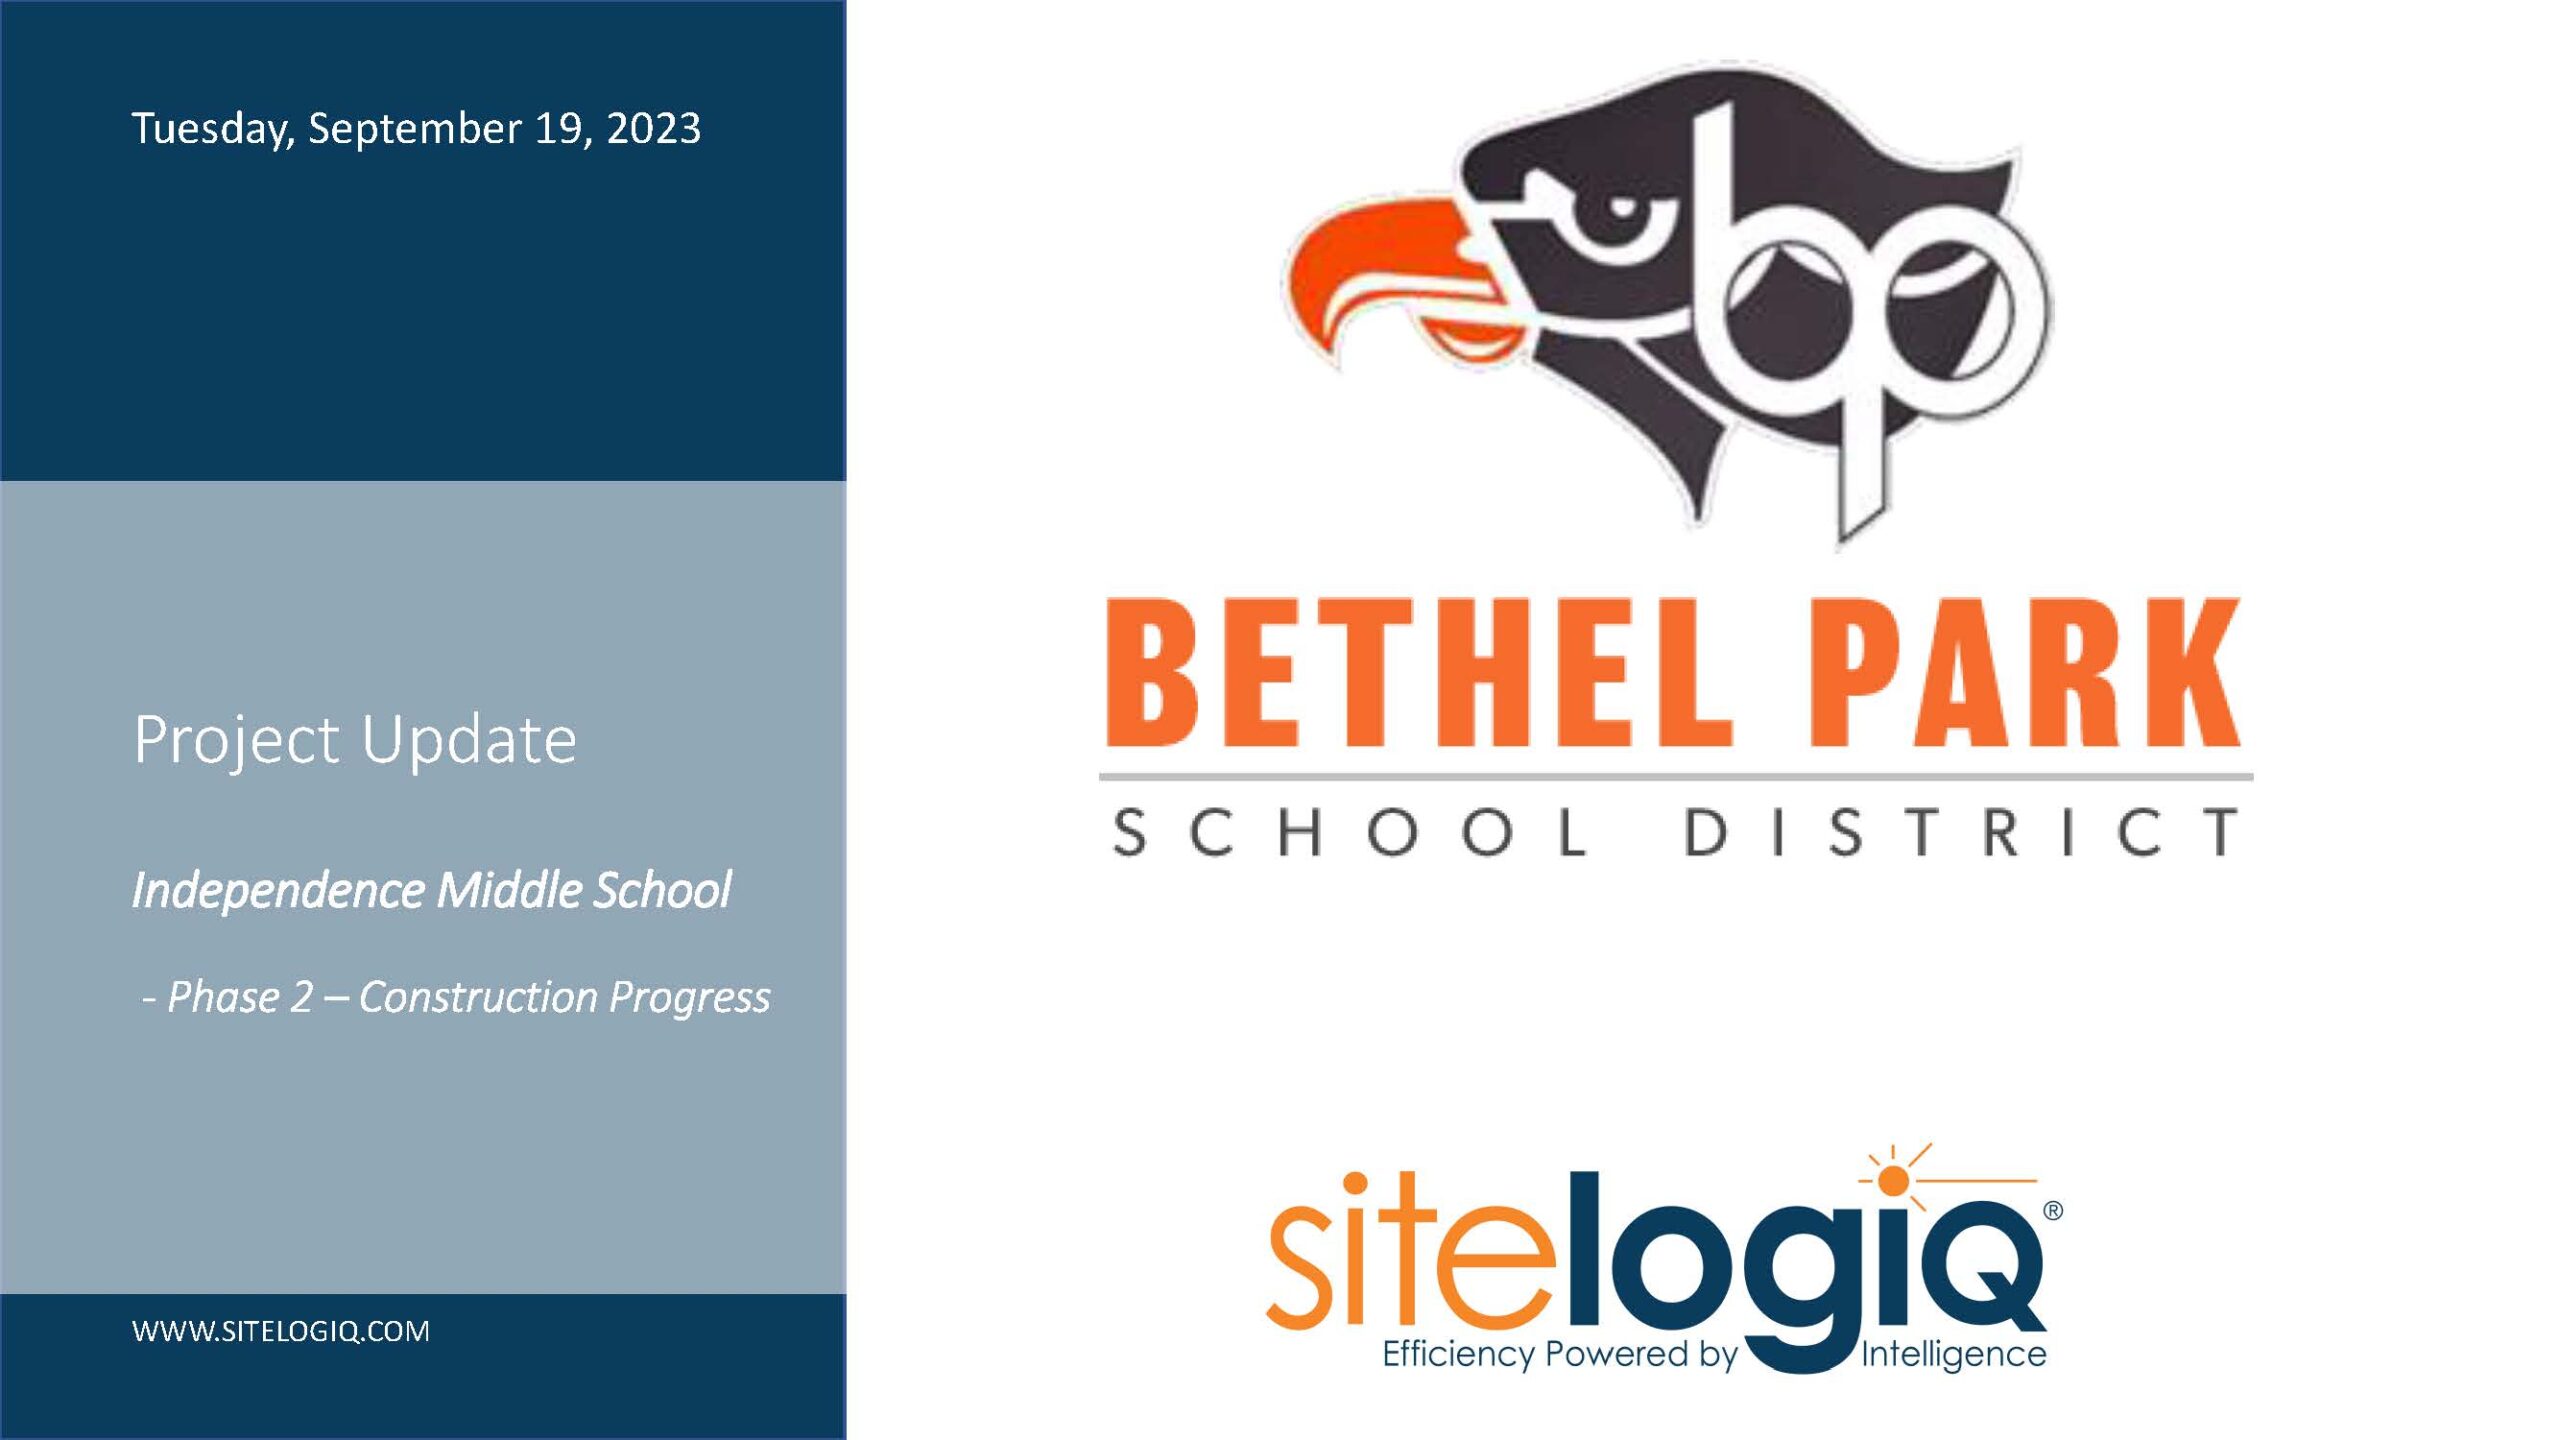 Bethel Park School District - Independence Middle School Project Update September 2023_Page_1